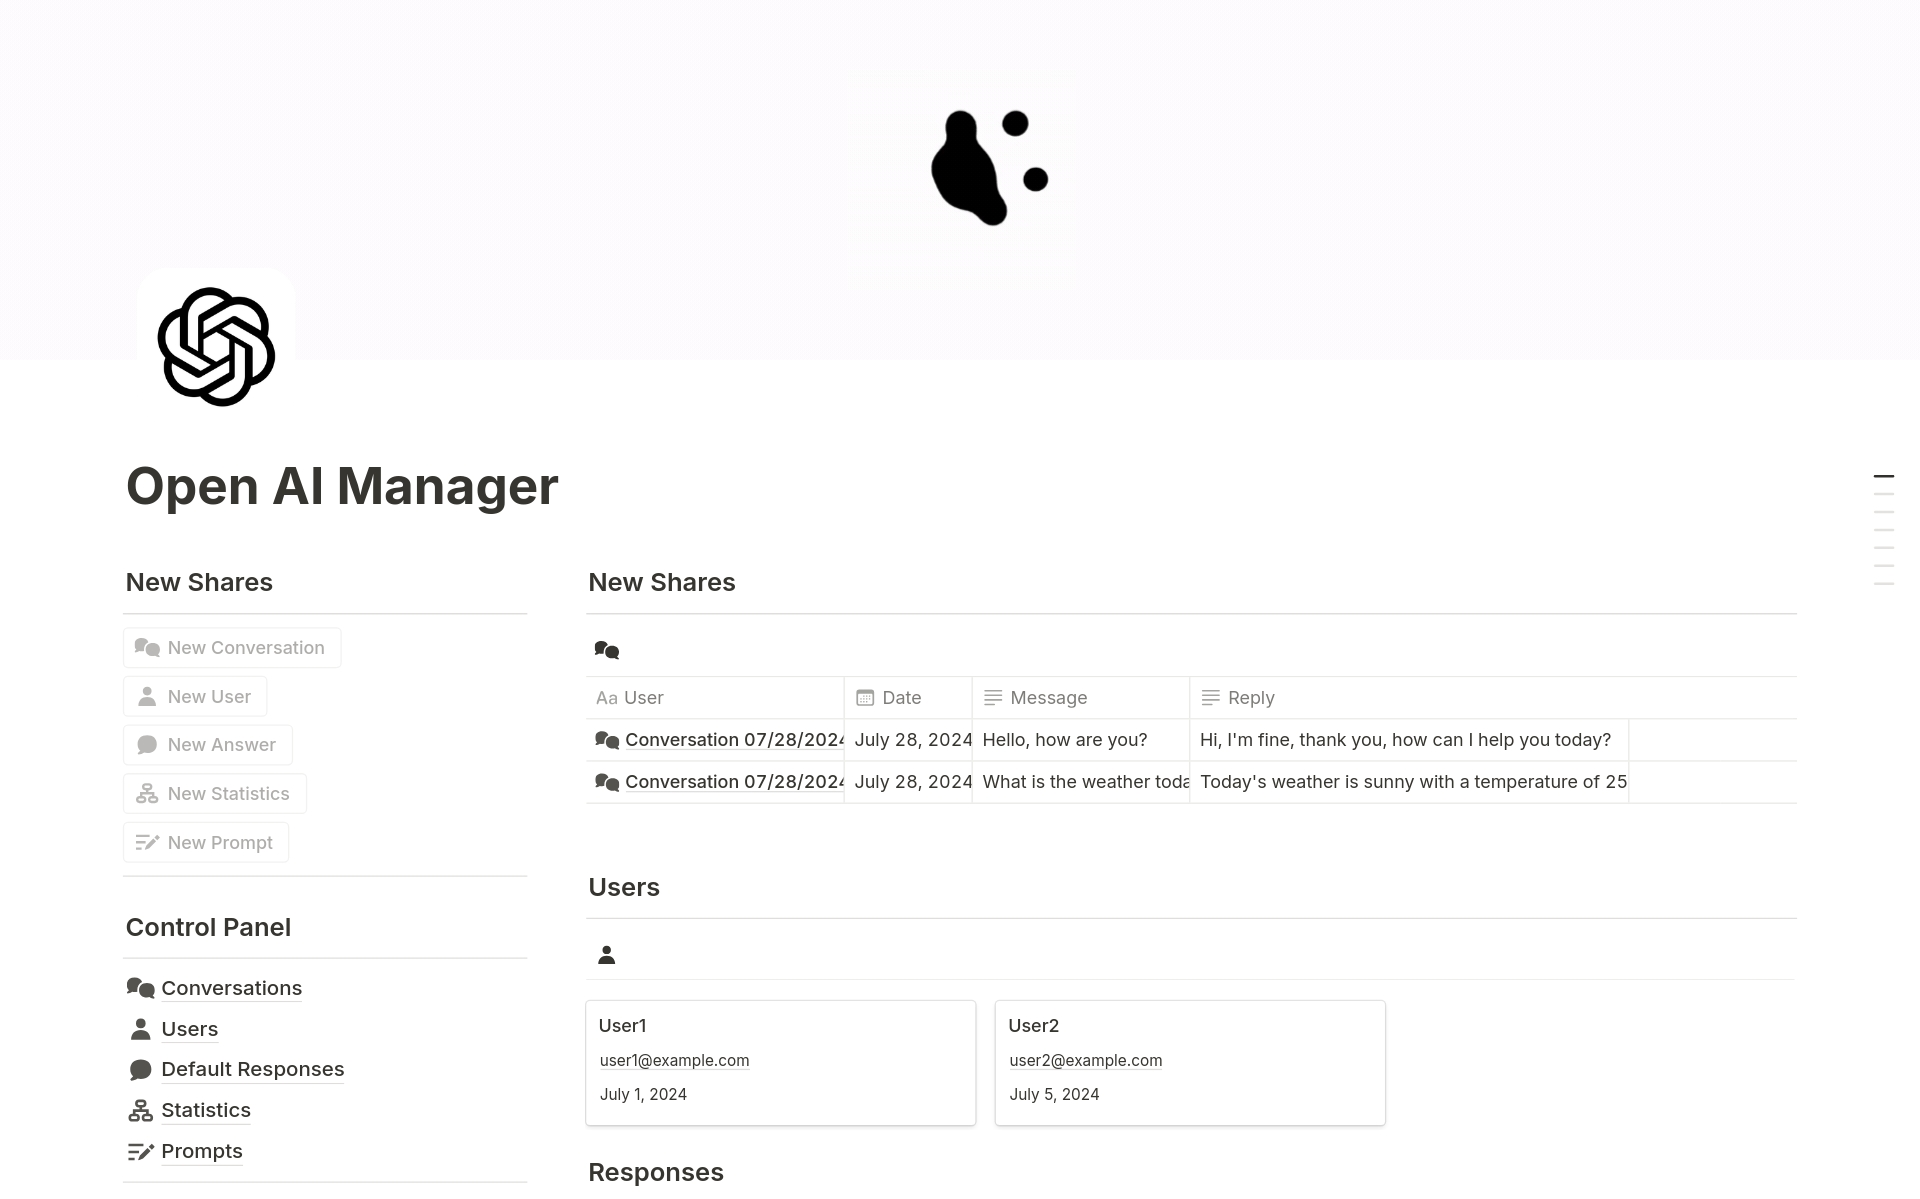 Organize your artificial intelligence projects with our Open AI Manager template in Notion. Ideal for development and research teams.